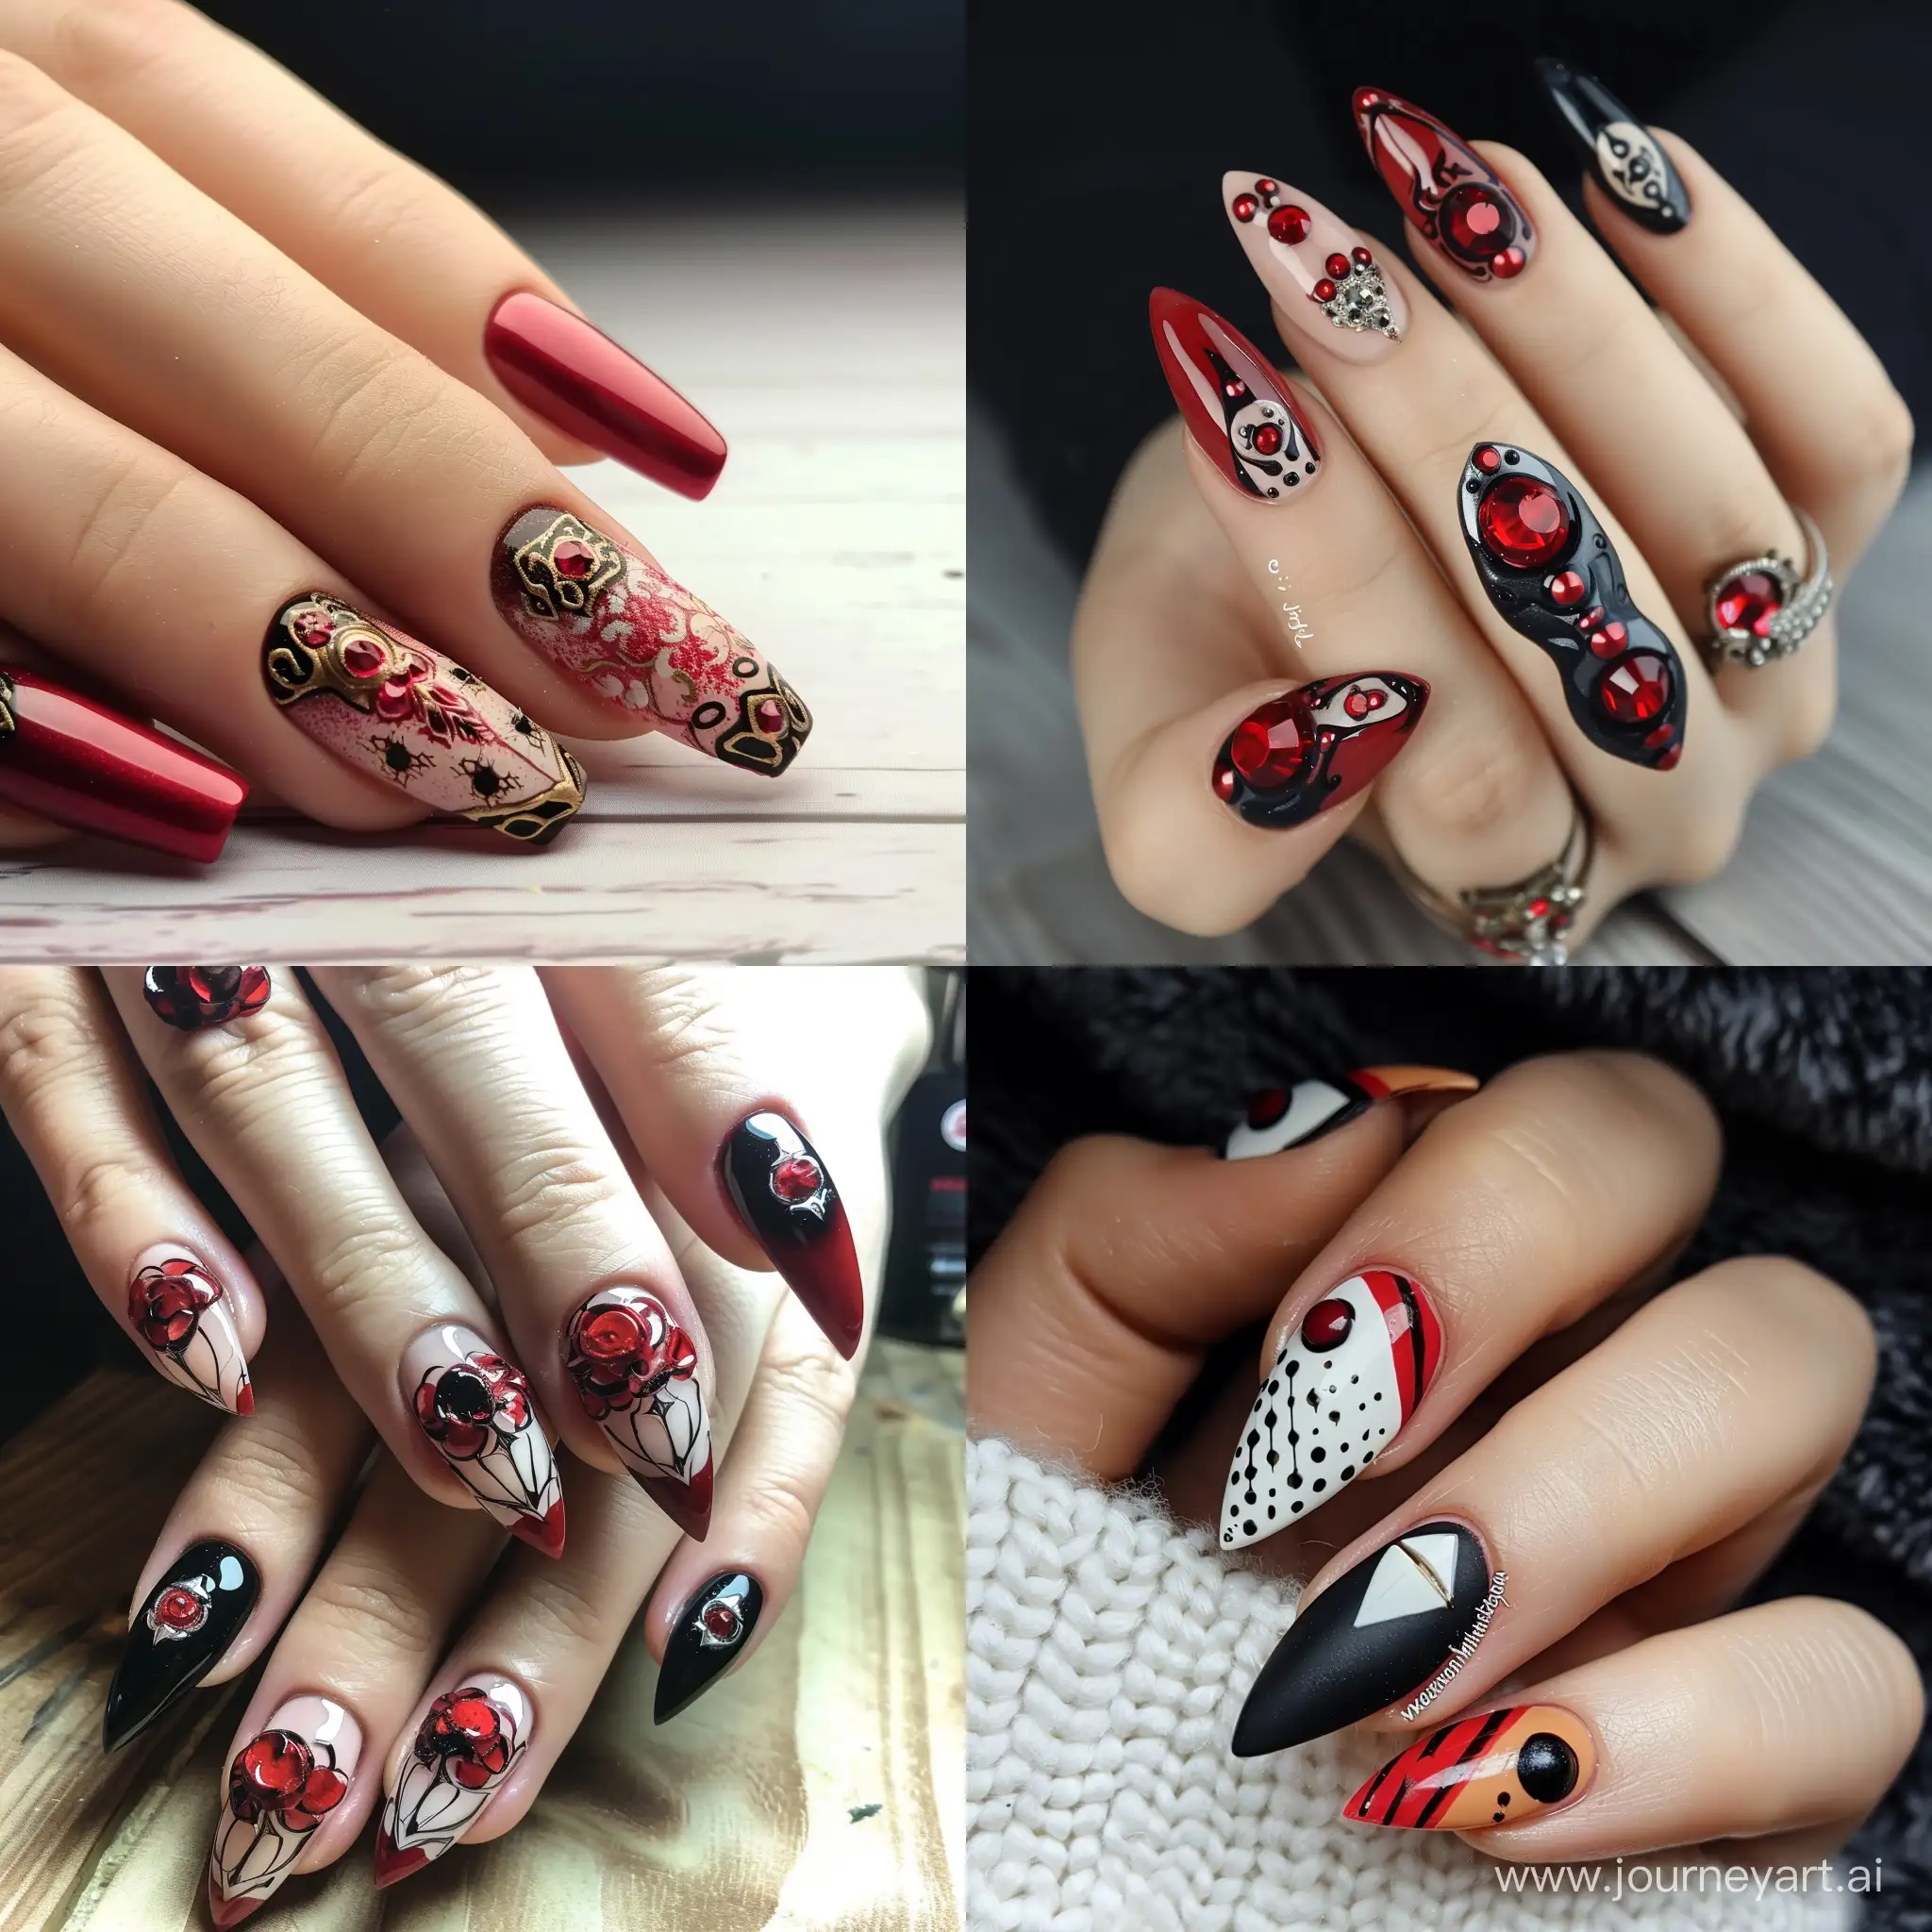 Dota-2themed-Manicure-Art-in-Square-Format-Version-6